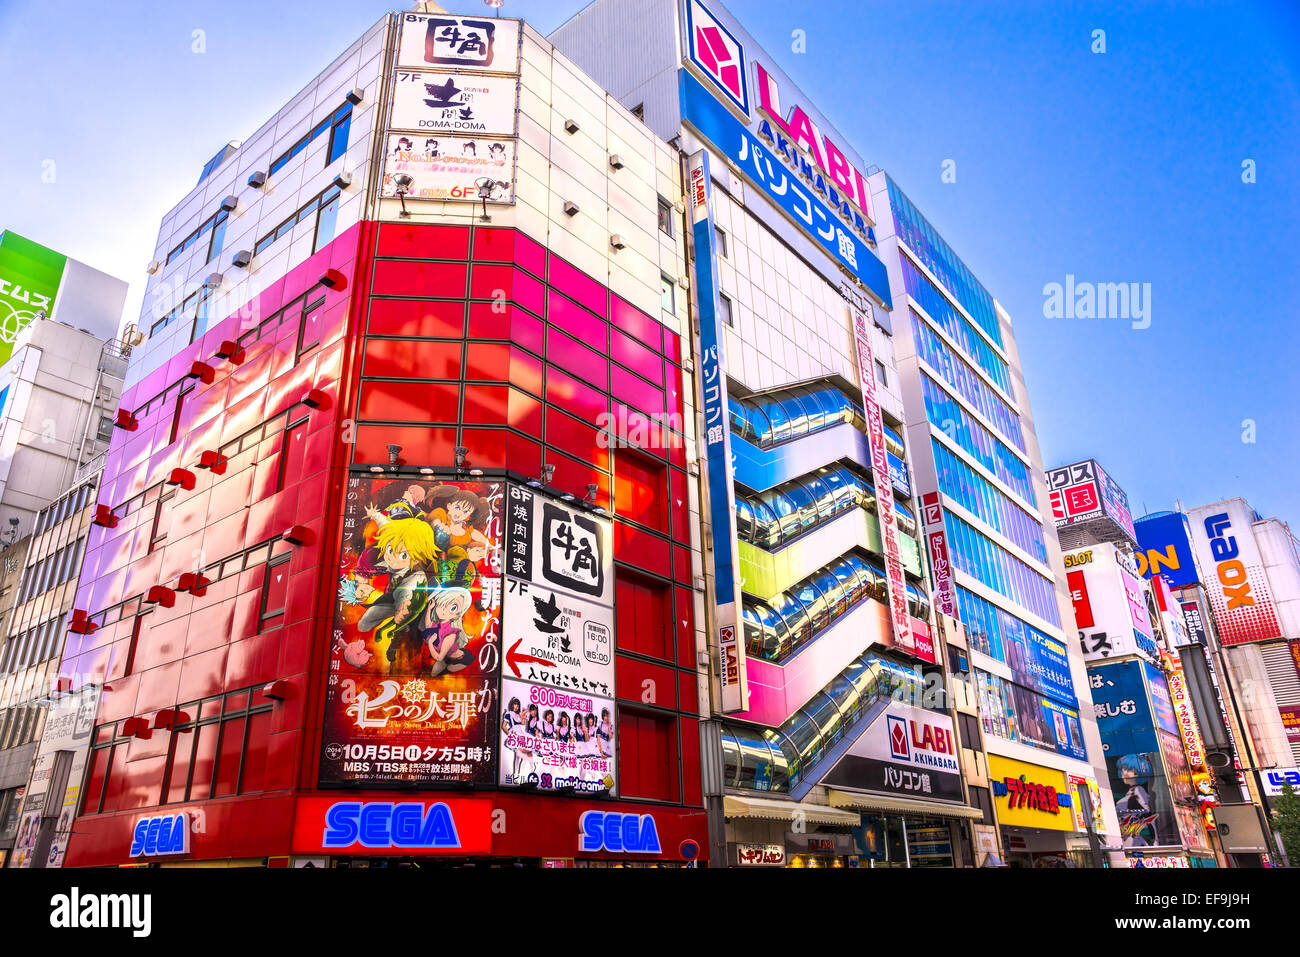 TOKYO - NOVEMBER 13: Akihabara district November13, 2014 in Tokyo, JP. The district is a major shopping area for electronic, com Stock Photo